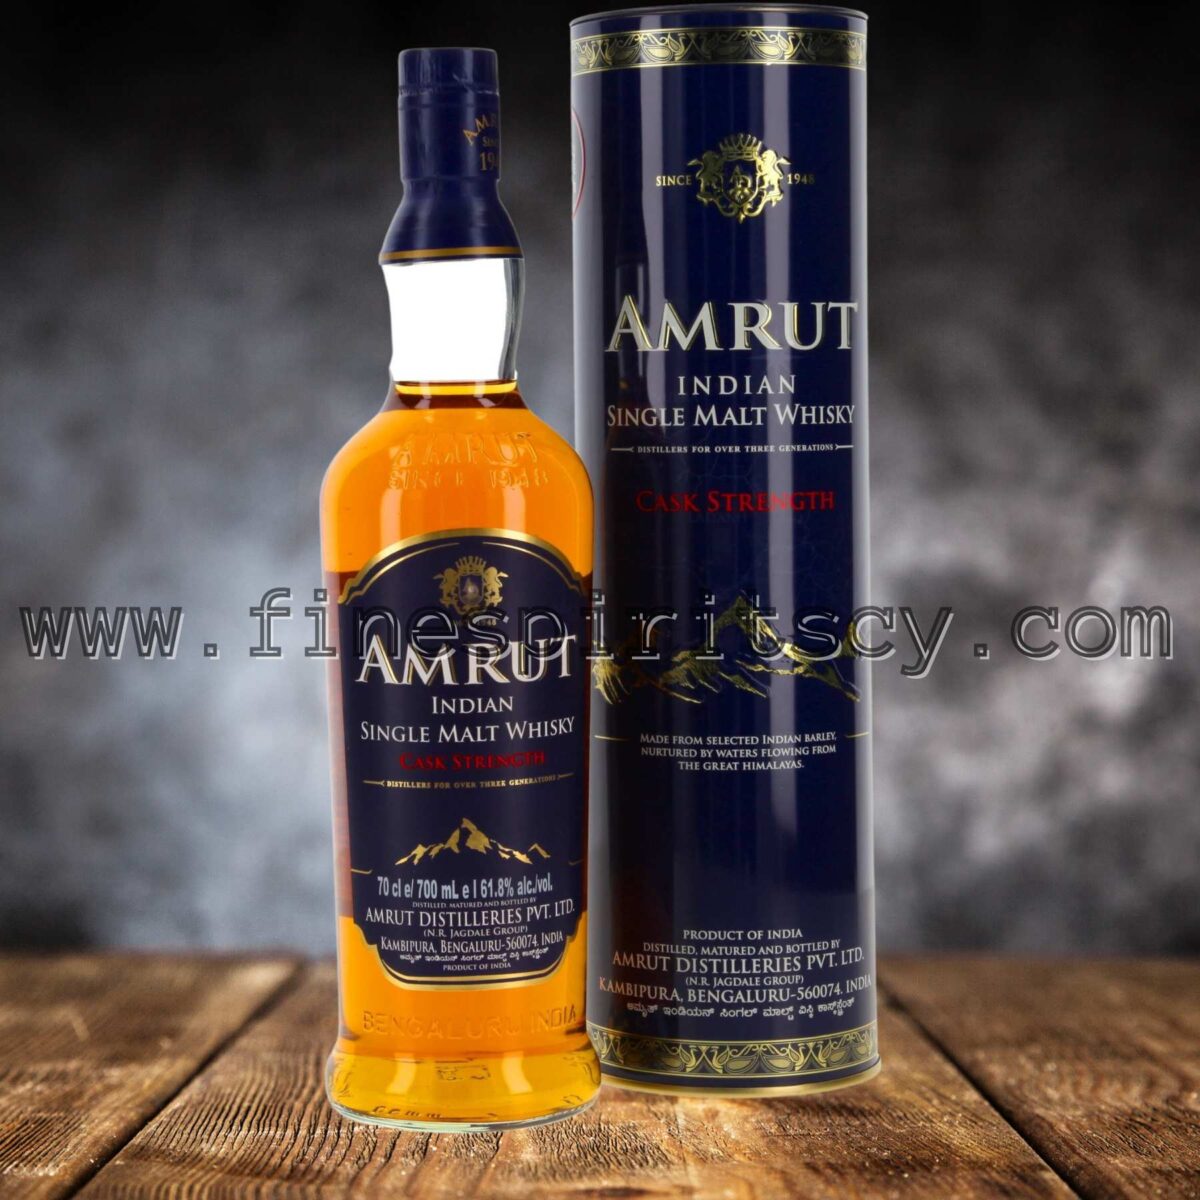 Amrut Indian Whisky Cask Strength Cyprus Cypriot Online Store Order Price